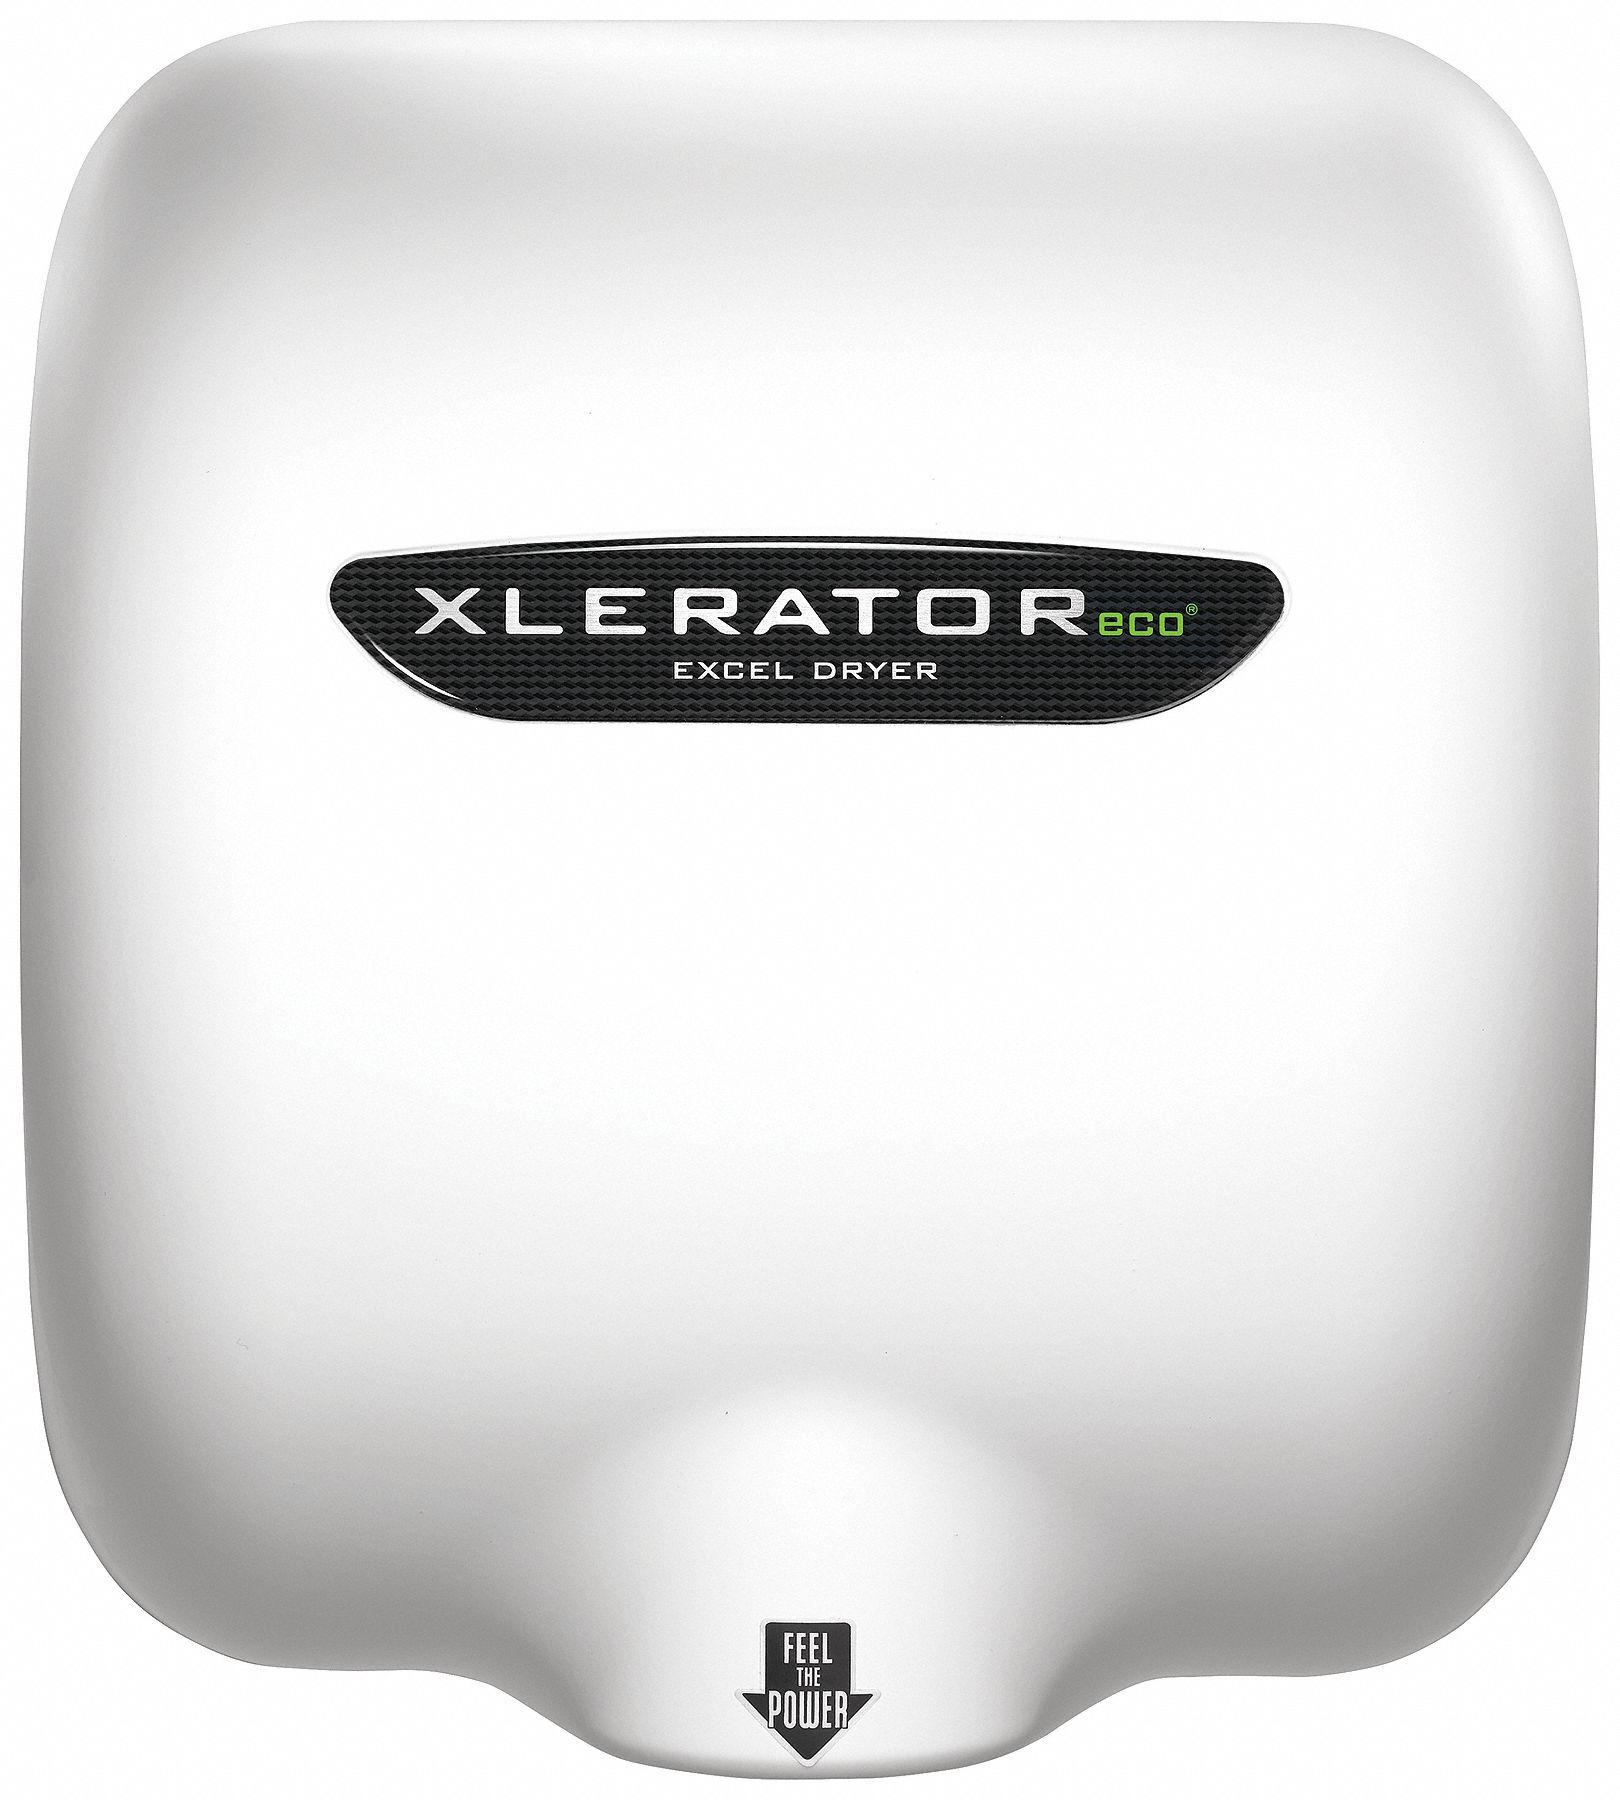 Hand Dryer: Integral, BMC, Auto, White, 10 sec Dry Time, 11.3/12.2 Amps, 110 to 120 Volt